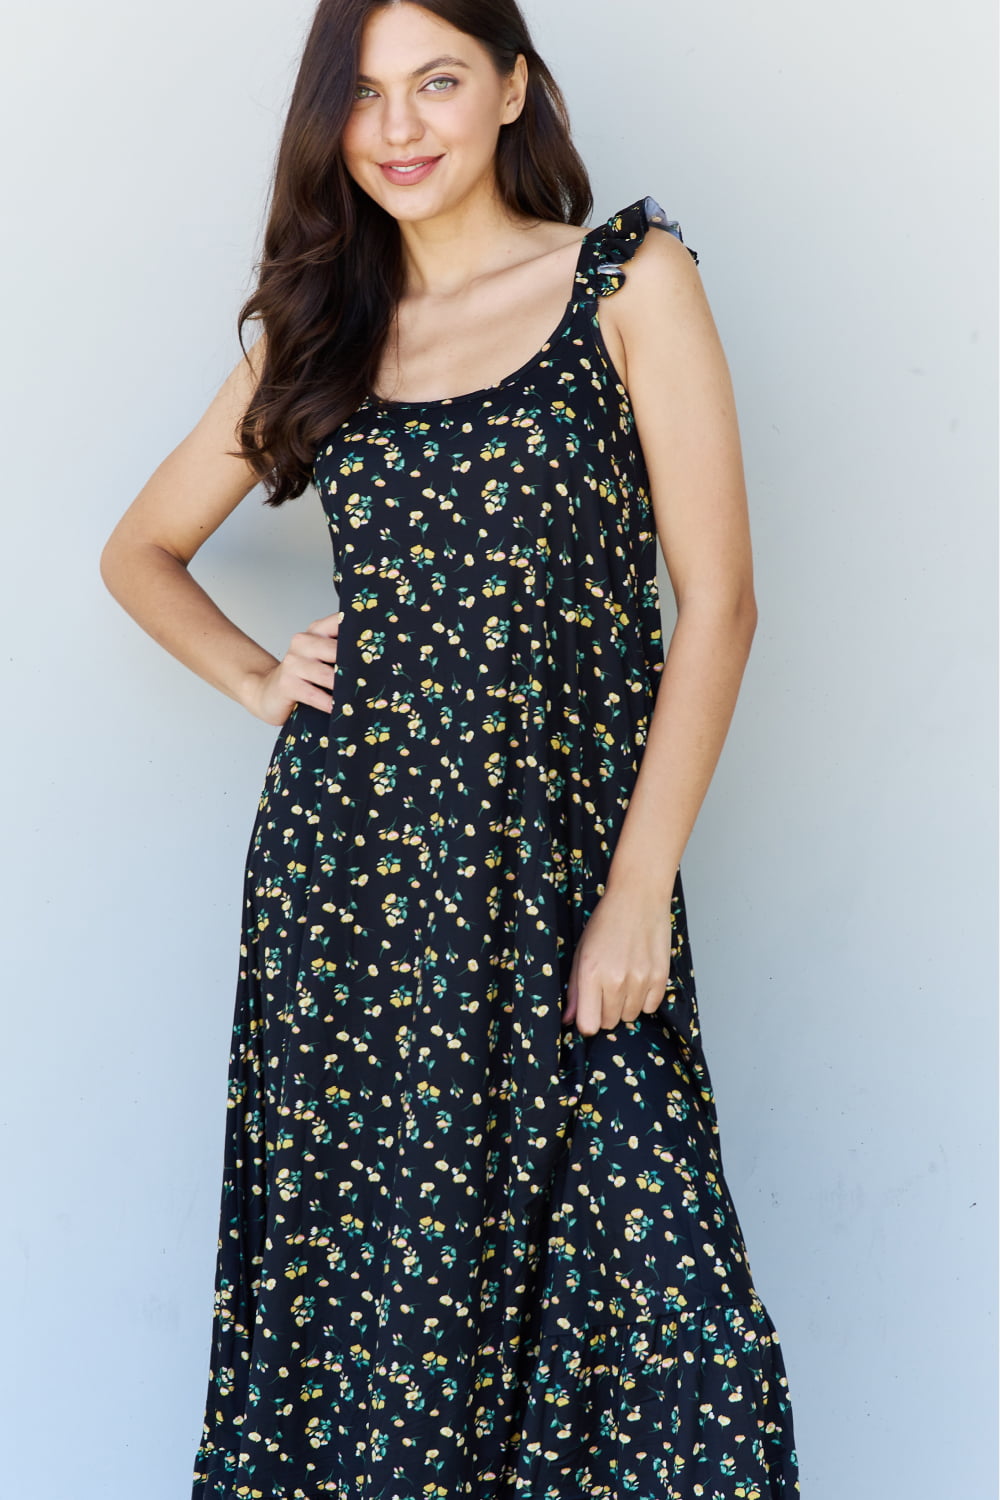 Black Doublju In The Garden Ruffle Floral Maxi Dress in  Black Yellow Floral Sentient Beauty Fashions Apparel & Accessories